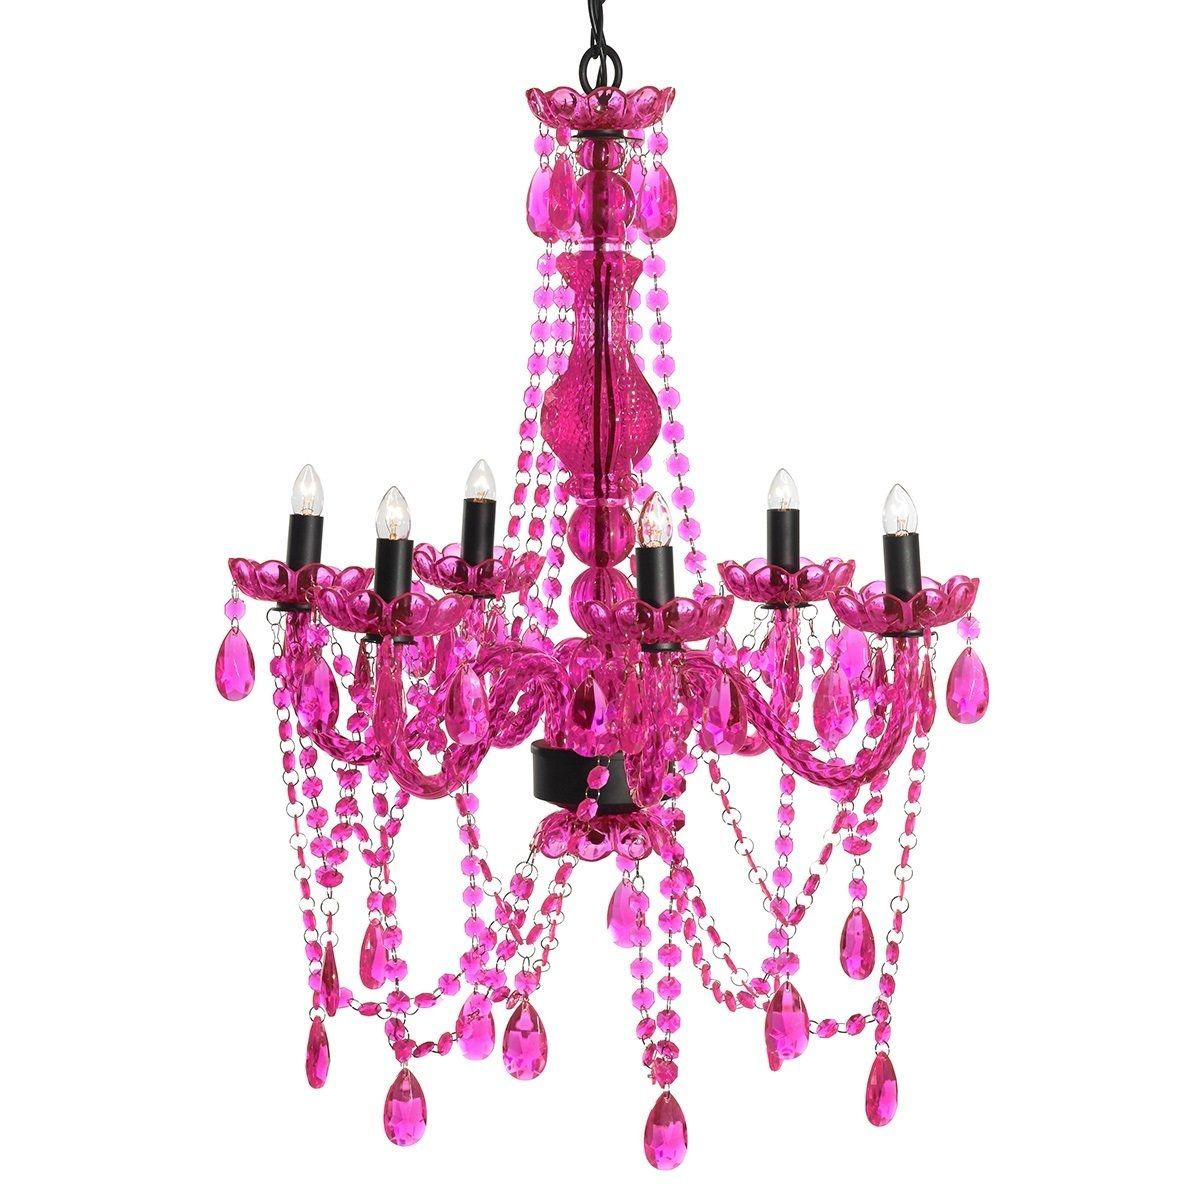 Lighting Candle Wall Decor Small Candle Chandelier Non In Purple Crystal Chandelier Lights (View 21 of 25)